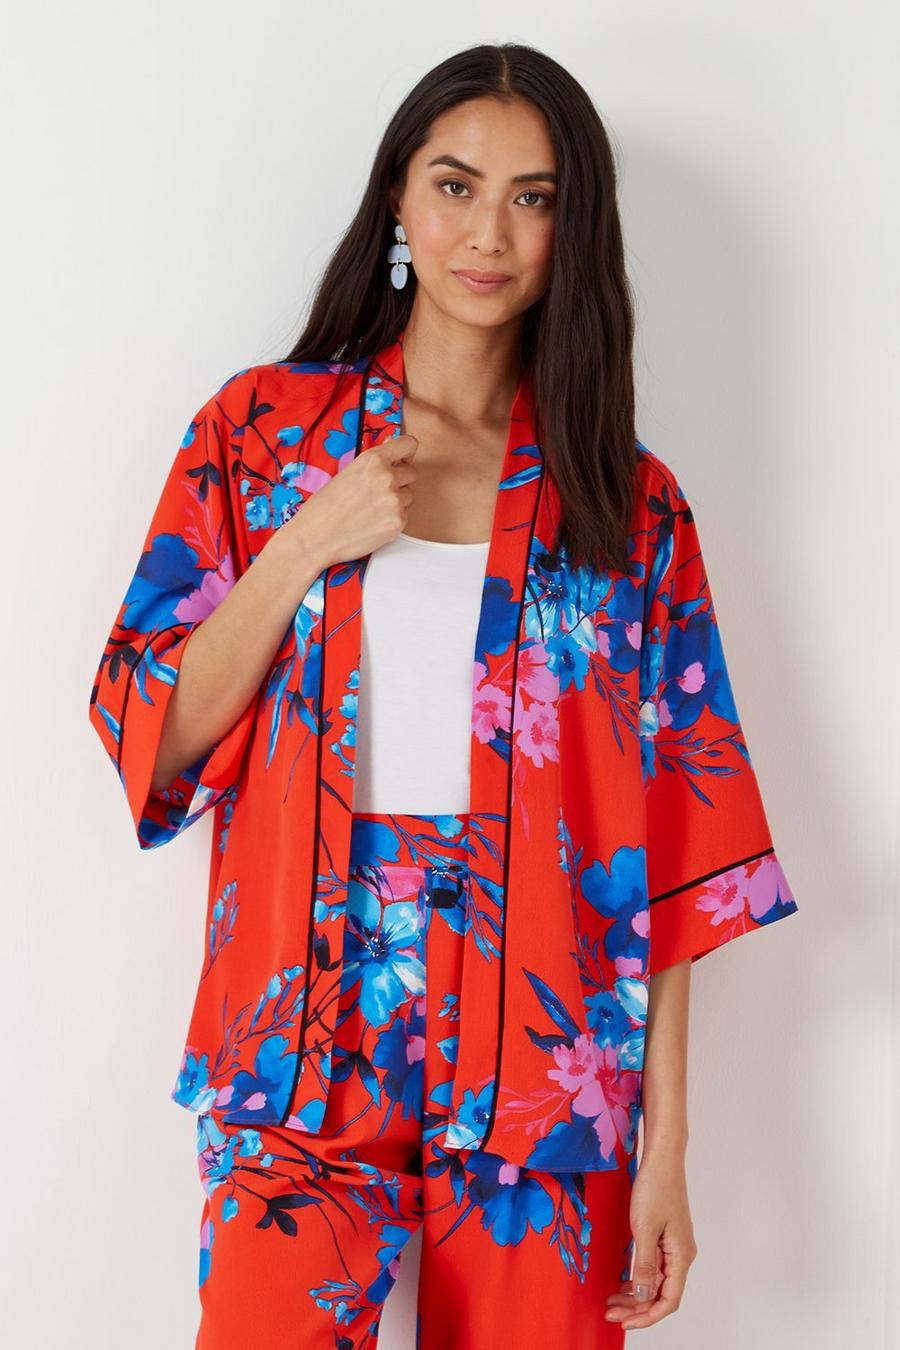 Red and Blue Floral Kimono Jacket